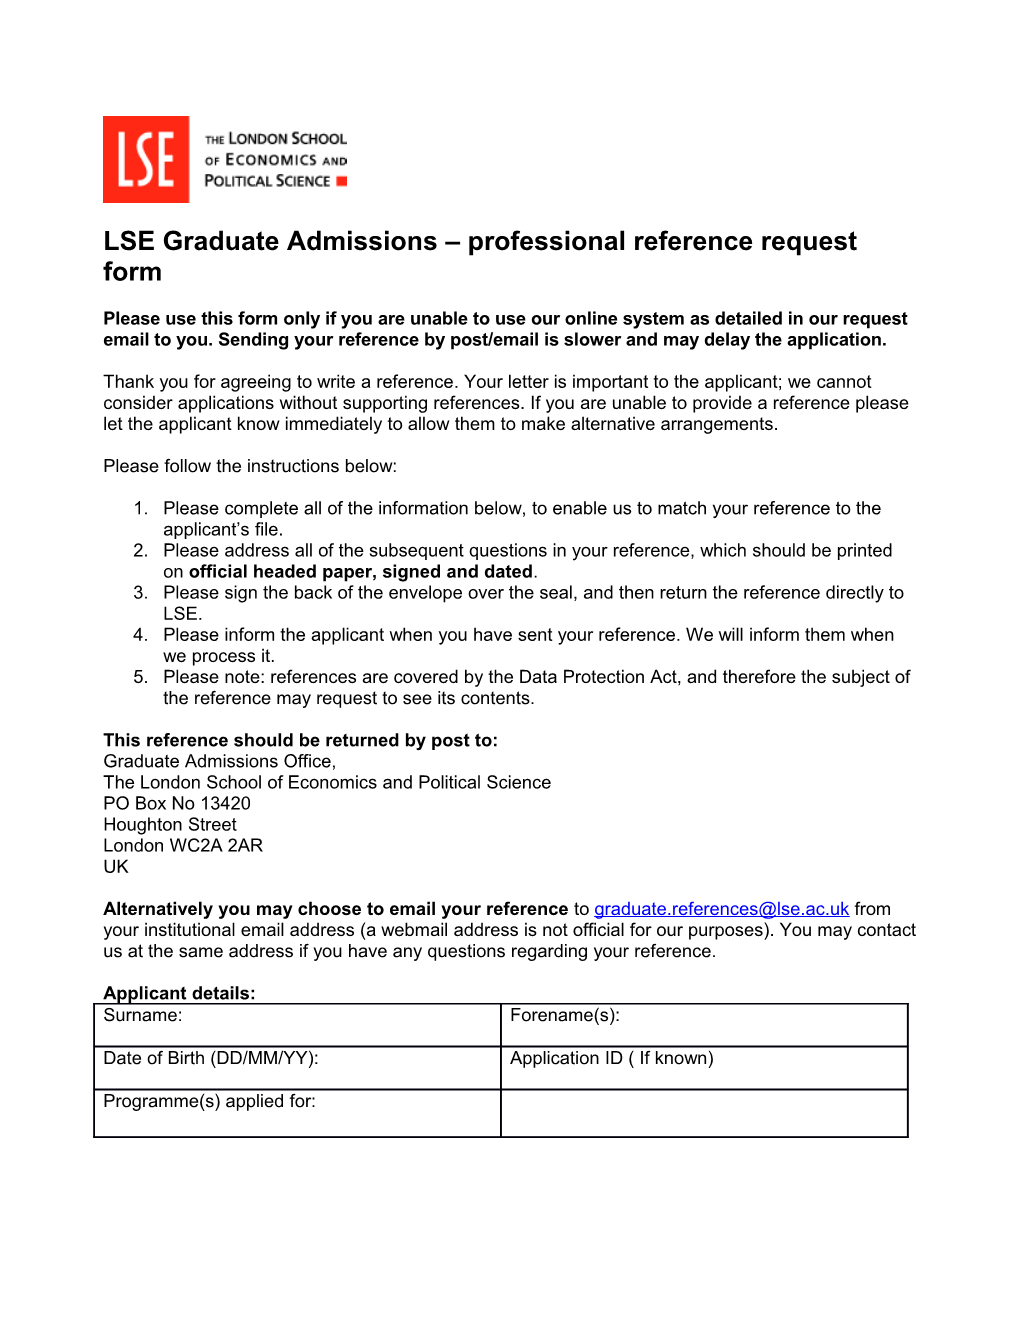 LSE Professional Reference Request Form (3)